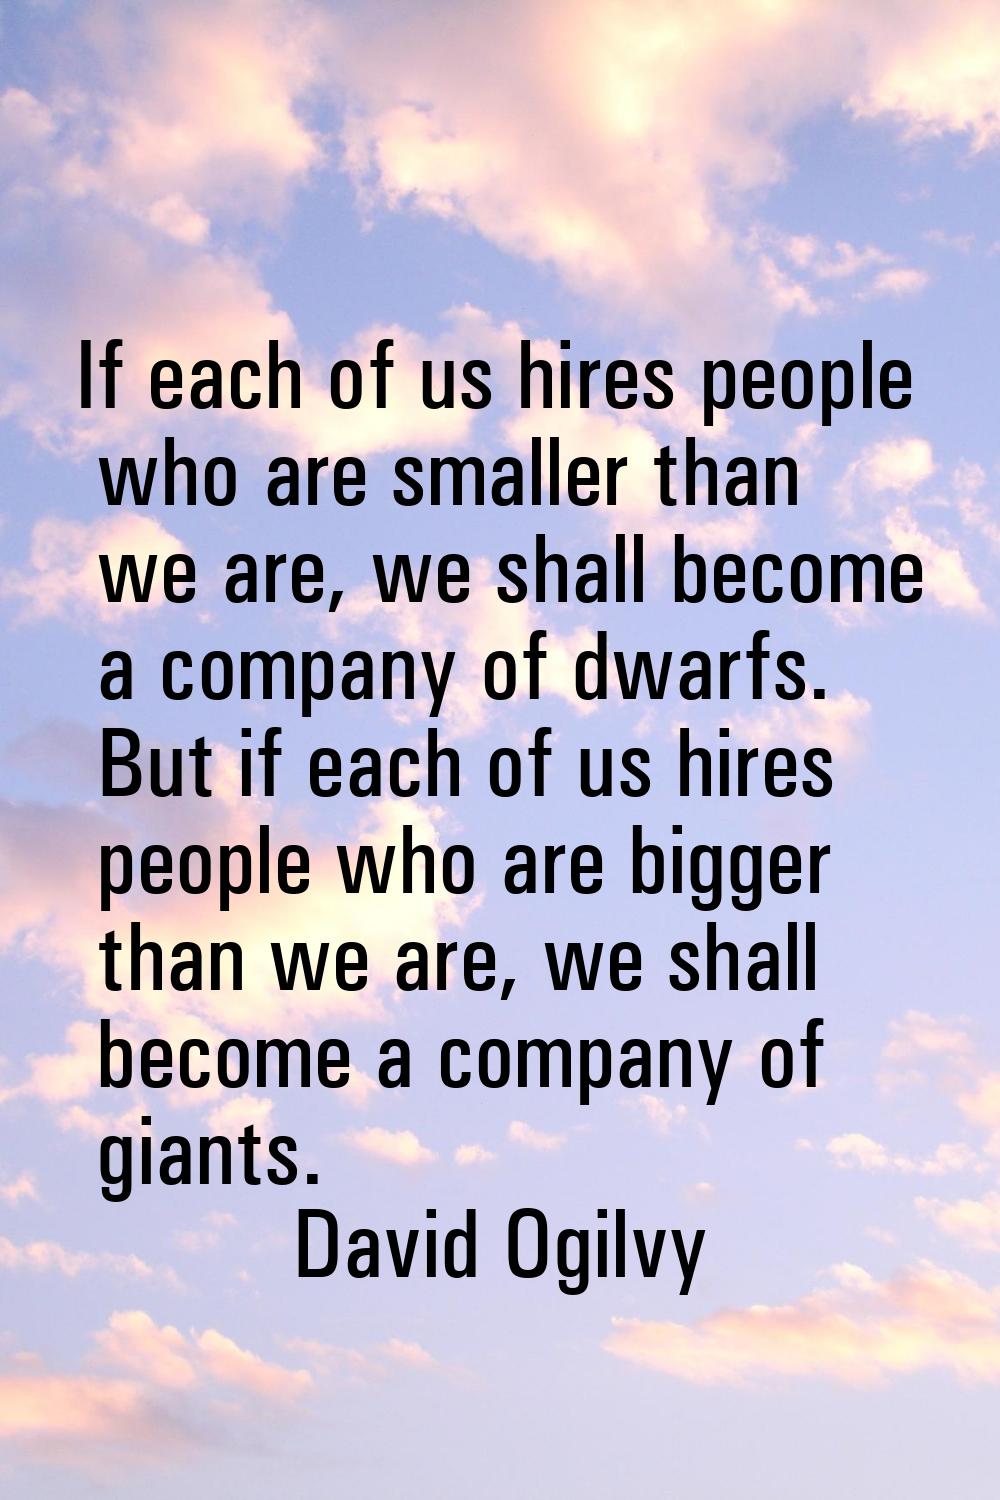 If each of us hires people who are smaller than we are, we shall become a company of dwarfs. But if